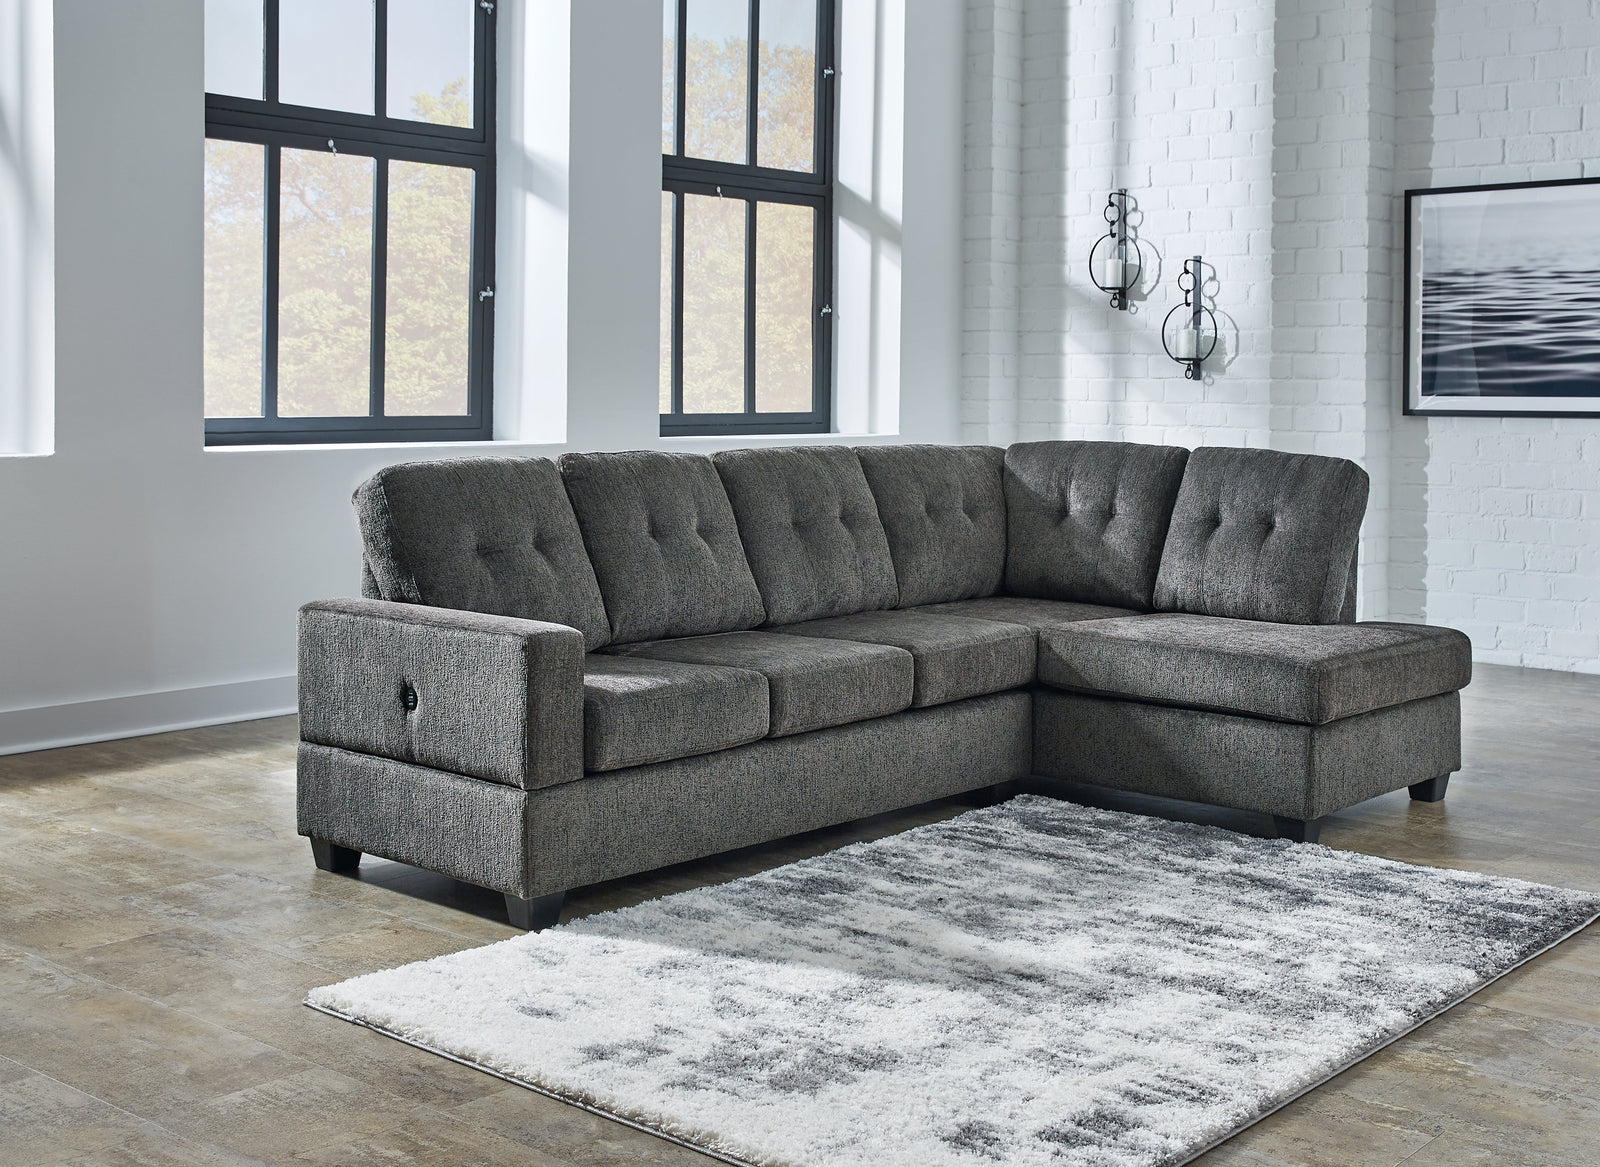 Kitler Smoke 2-Piece Sectional With Chaise